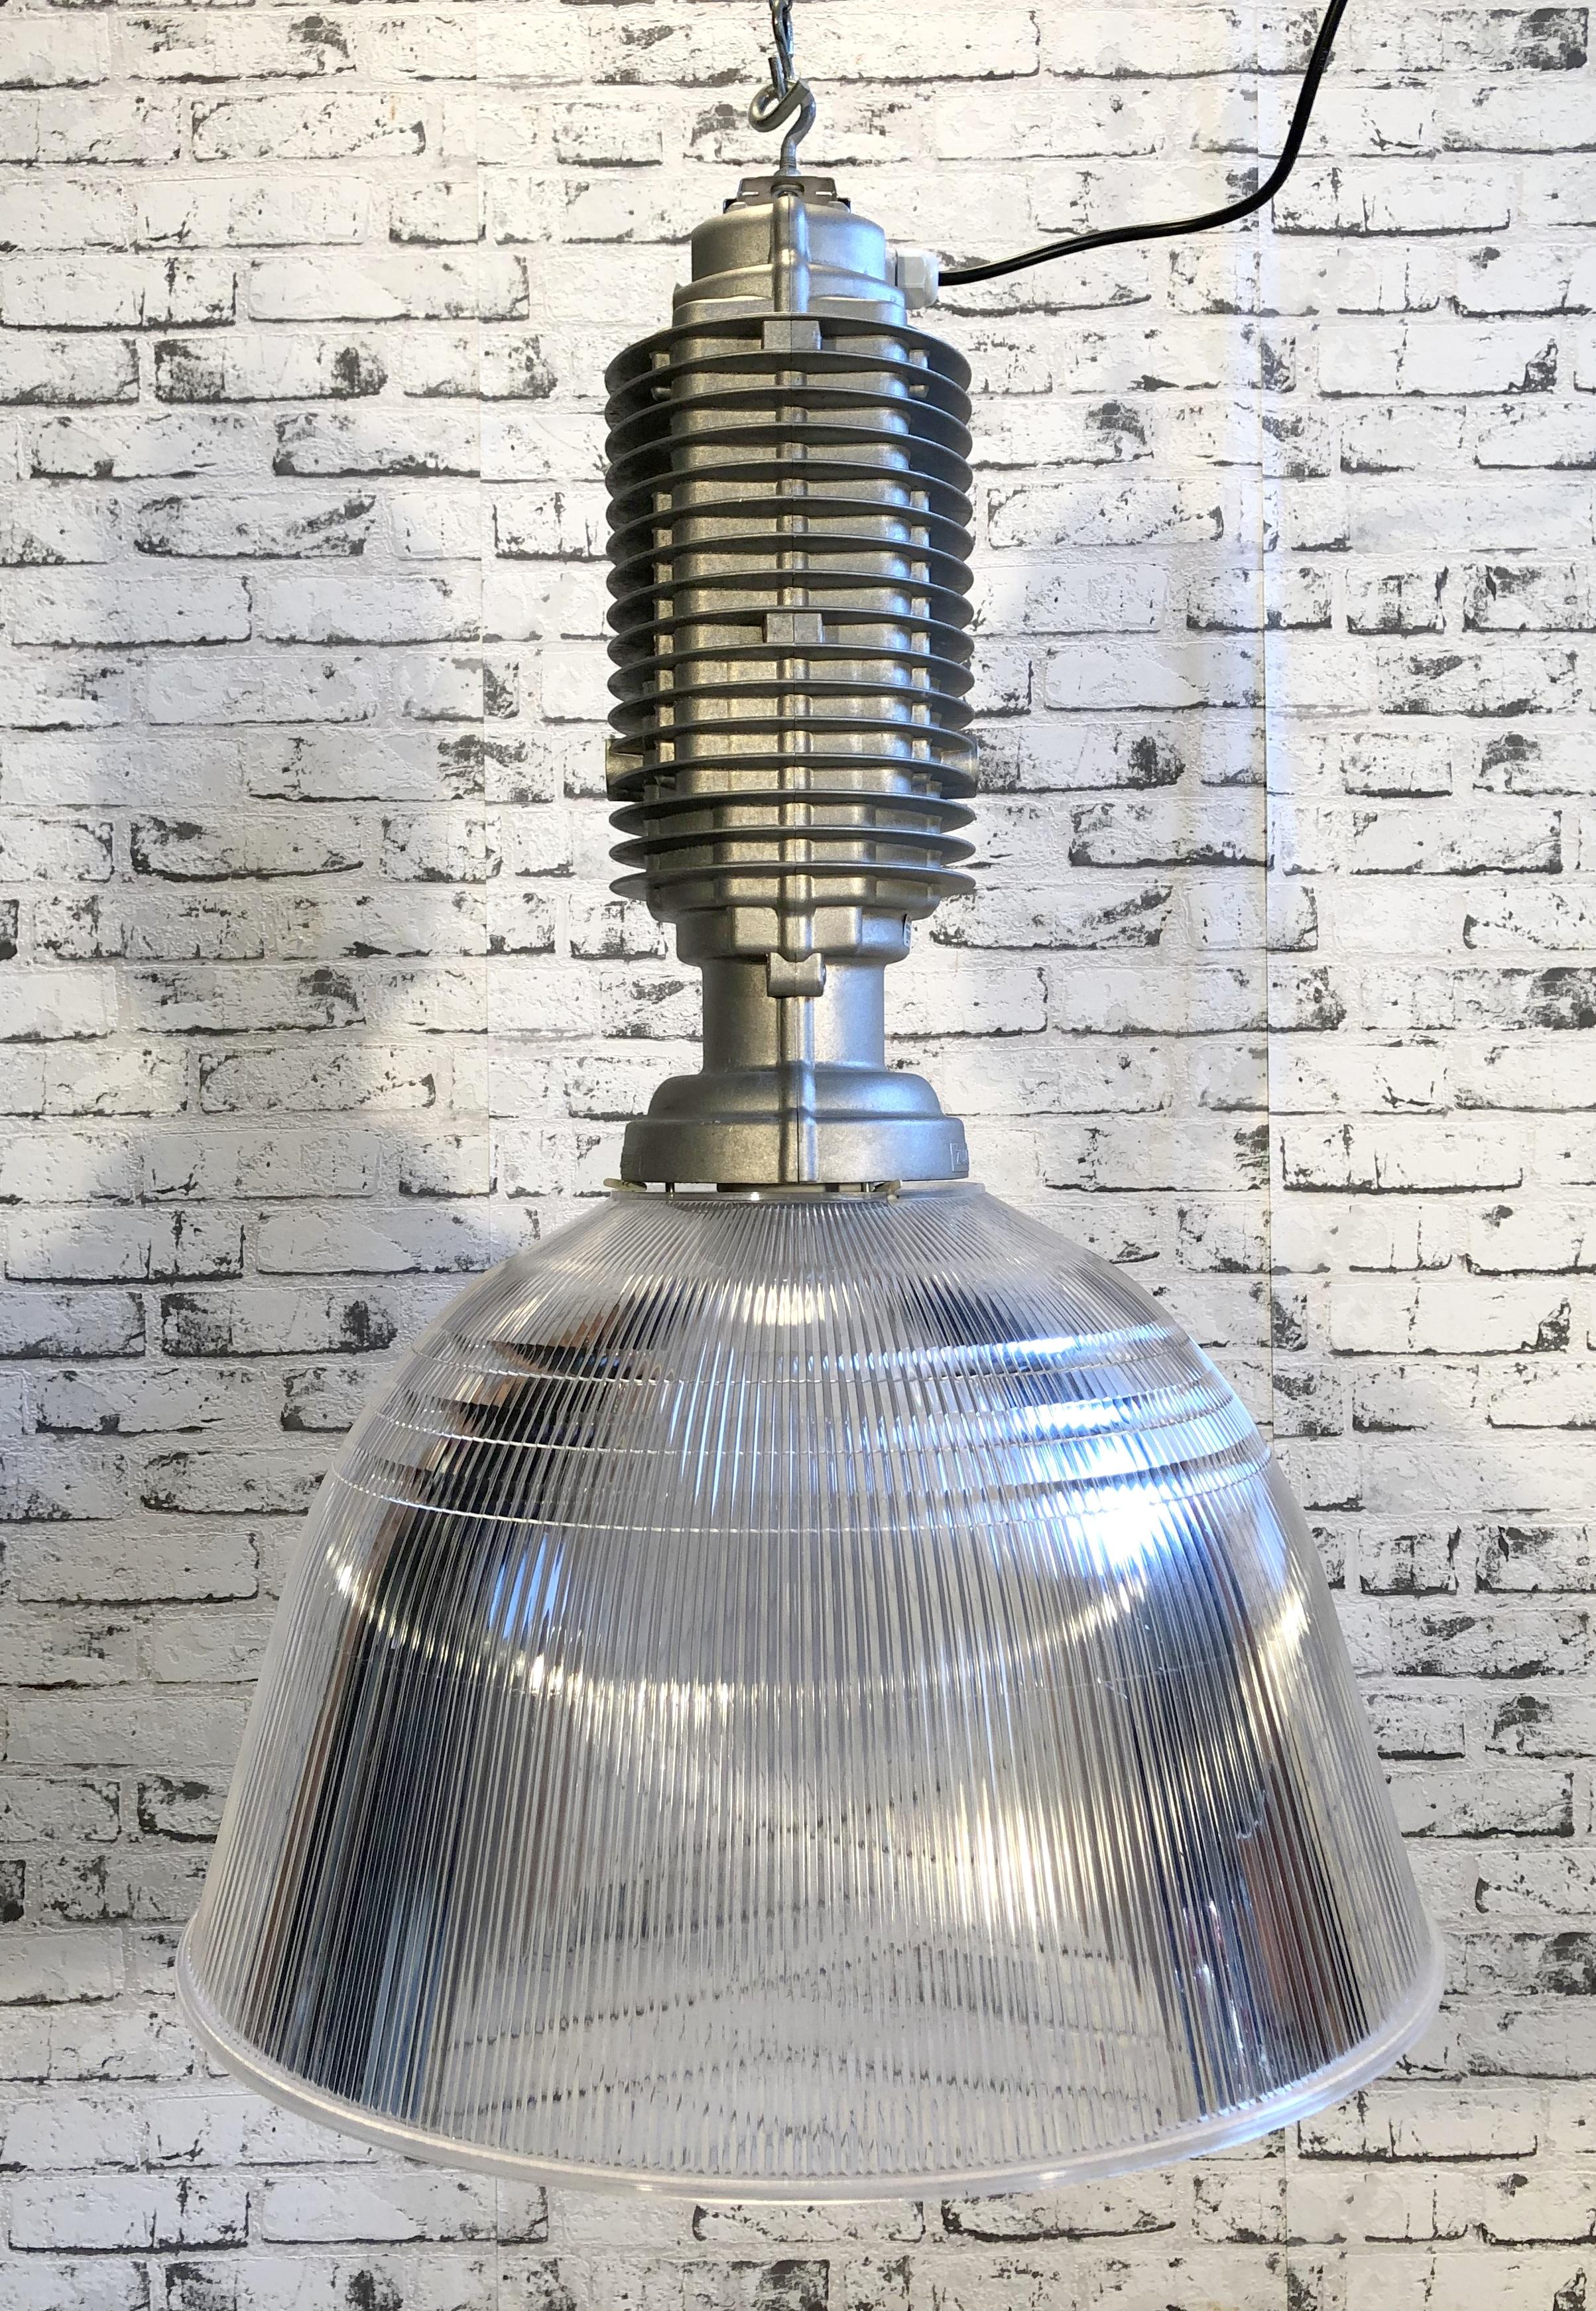 This industrial pendant was designed by Charles Keller for Zumtobel and was used in factories. It features cast aluminum top, transparent plastic shade, new porcelain socket for E27 bulbs and new wire. It weighs 7 kg. Diameter 55 cm.